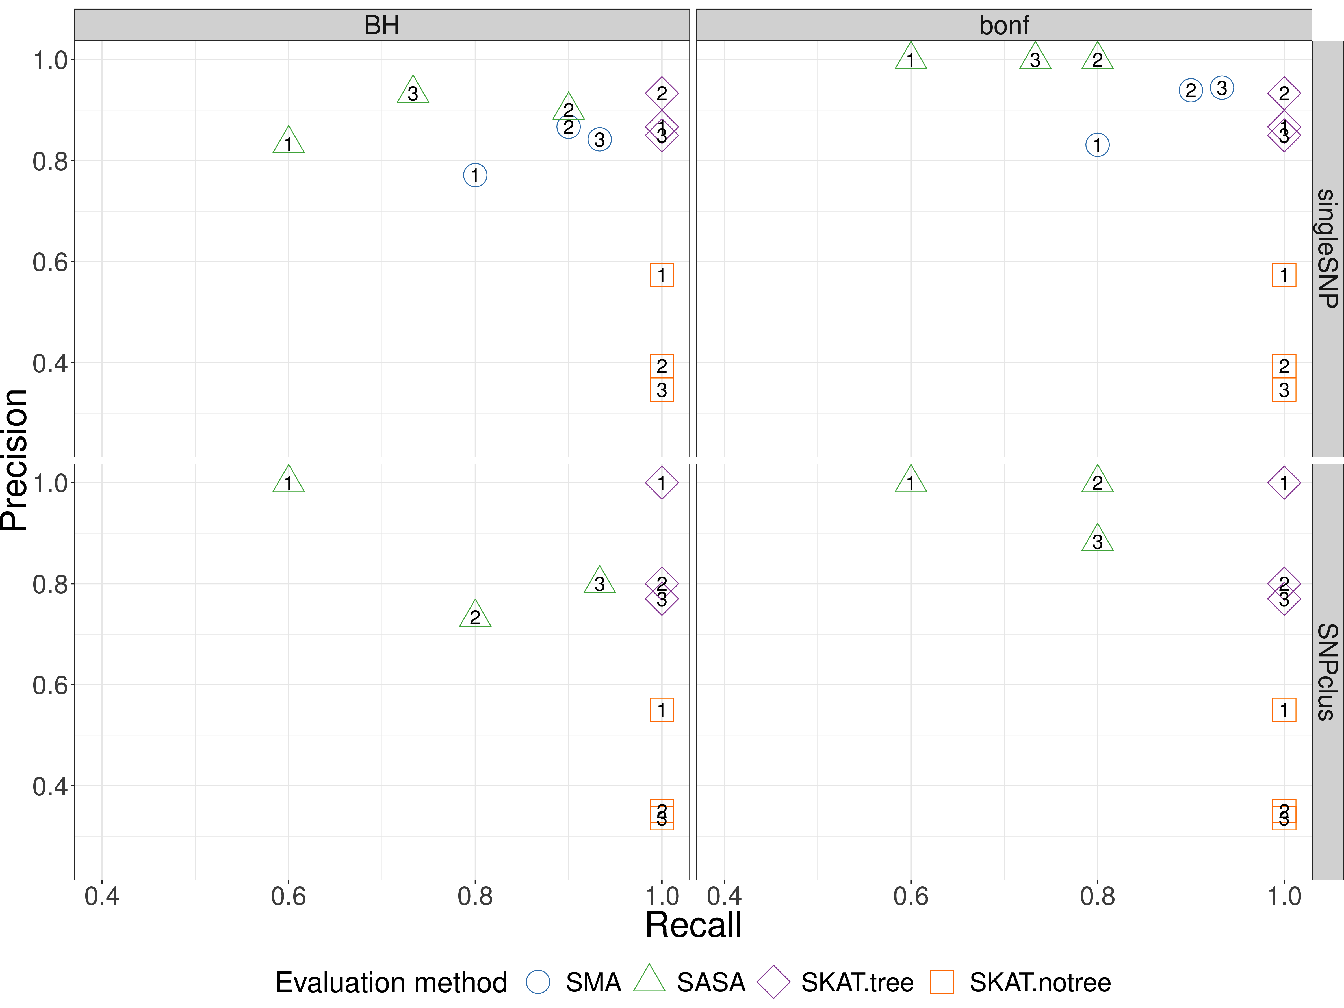 Recall vs Precision for each method (shape and colours in plot). In rows are the simulation scenarios. In columns, we evaluate performance using Benjamini-Hochberg threshold (left) and bonferroni correction threshold (right). The second row illustrates the performance to retrieve the true causal genomic region under the SNPclus scenario, thus only group-based approaches are considered (SASA, SKATtree and SKATnotree). The numbers inside the points correspond to the number of causal predictors and each point is the average value of 5 replicates.